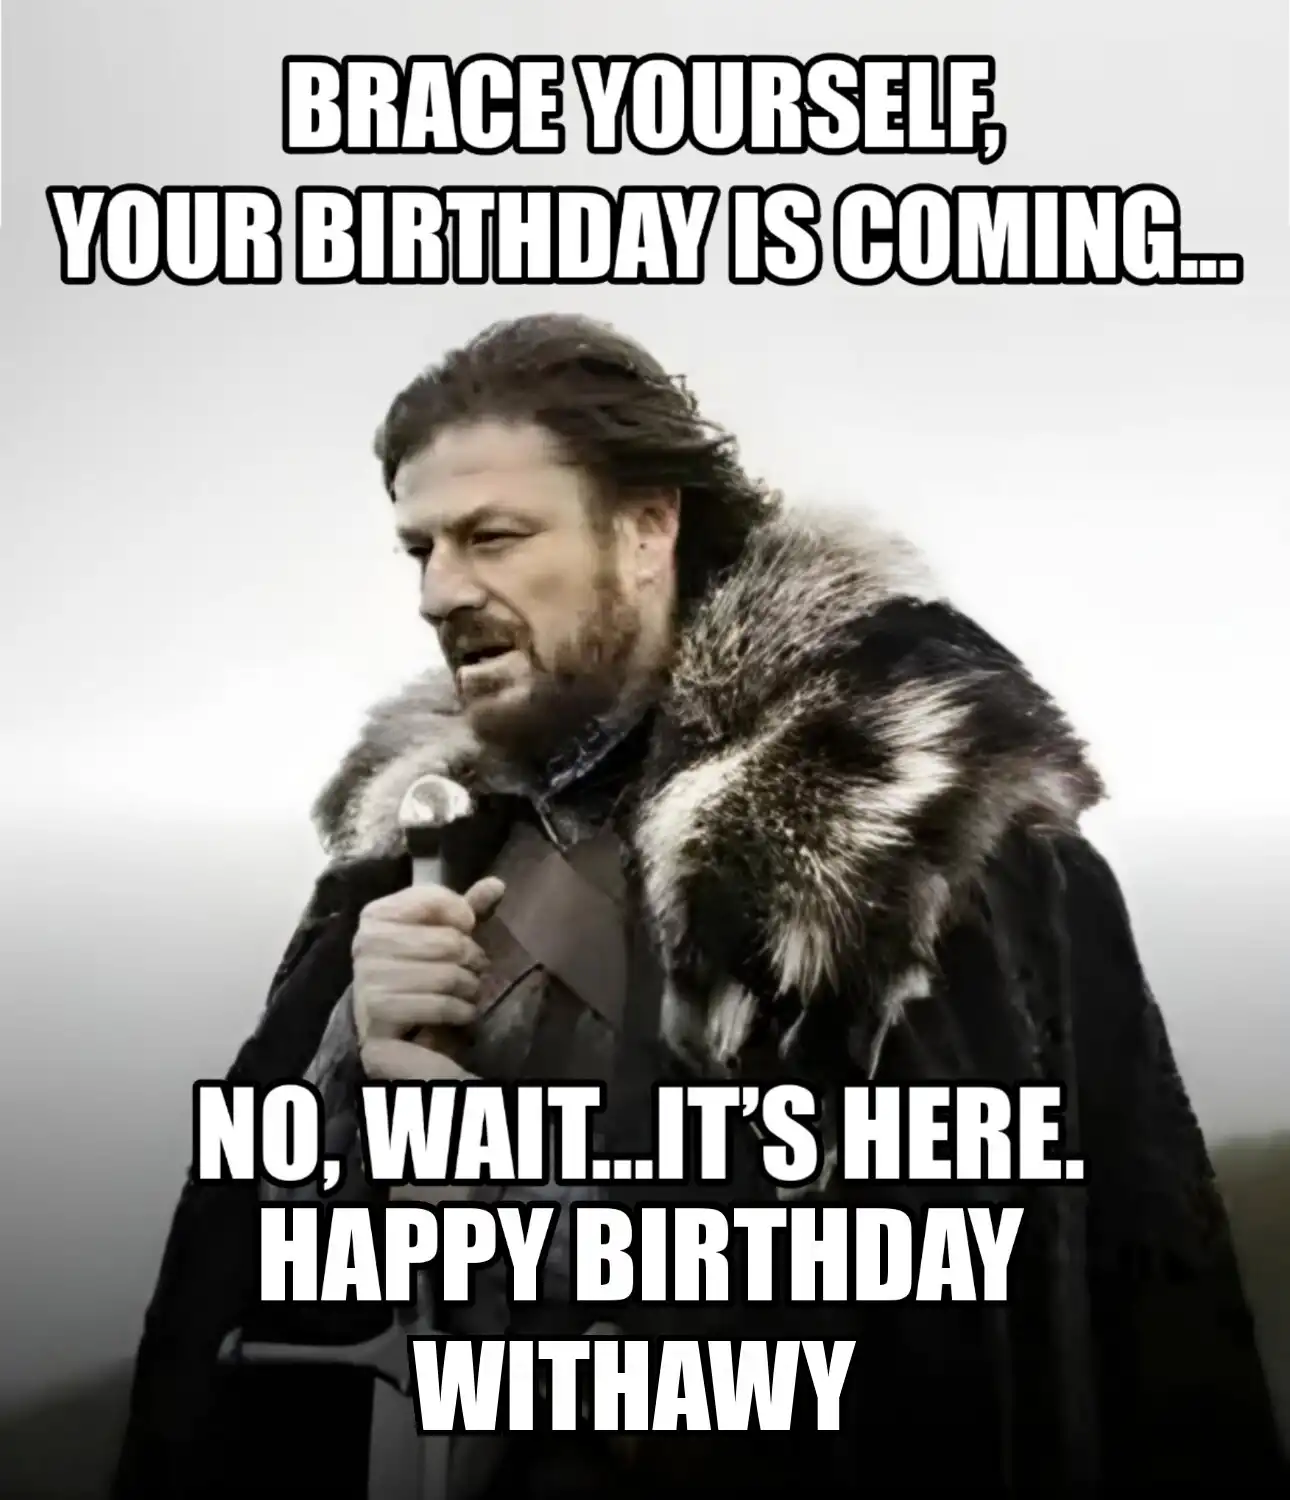 Happy Birthday Withawy Brace Yourself Your Birthday Is Coming Meme